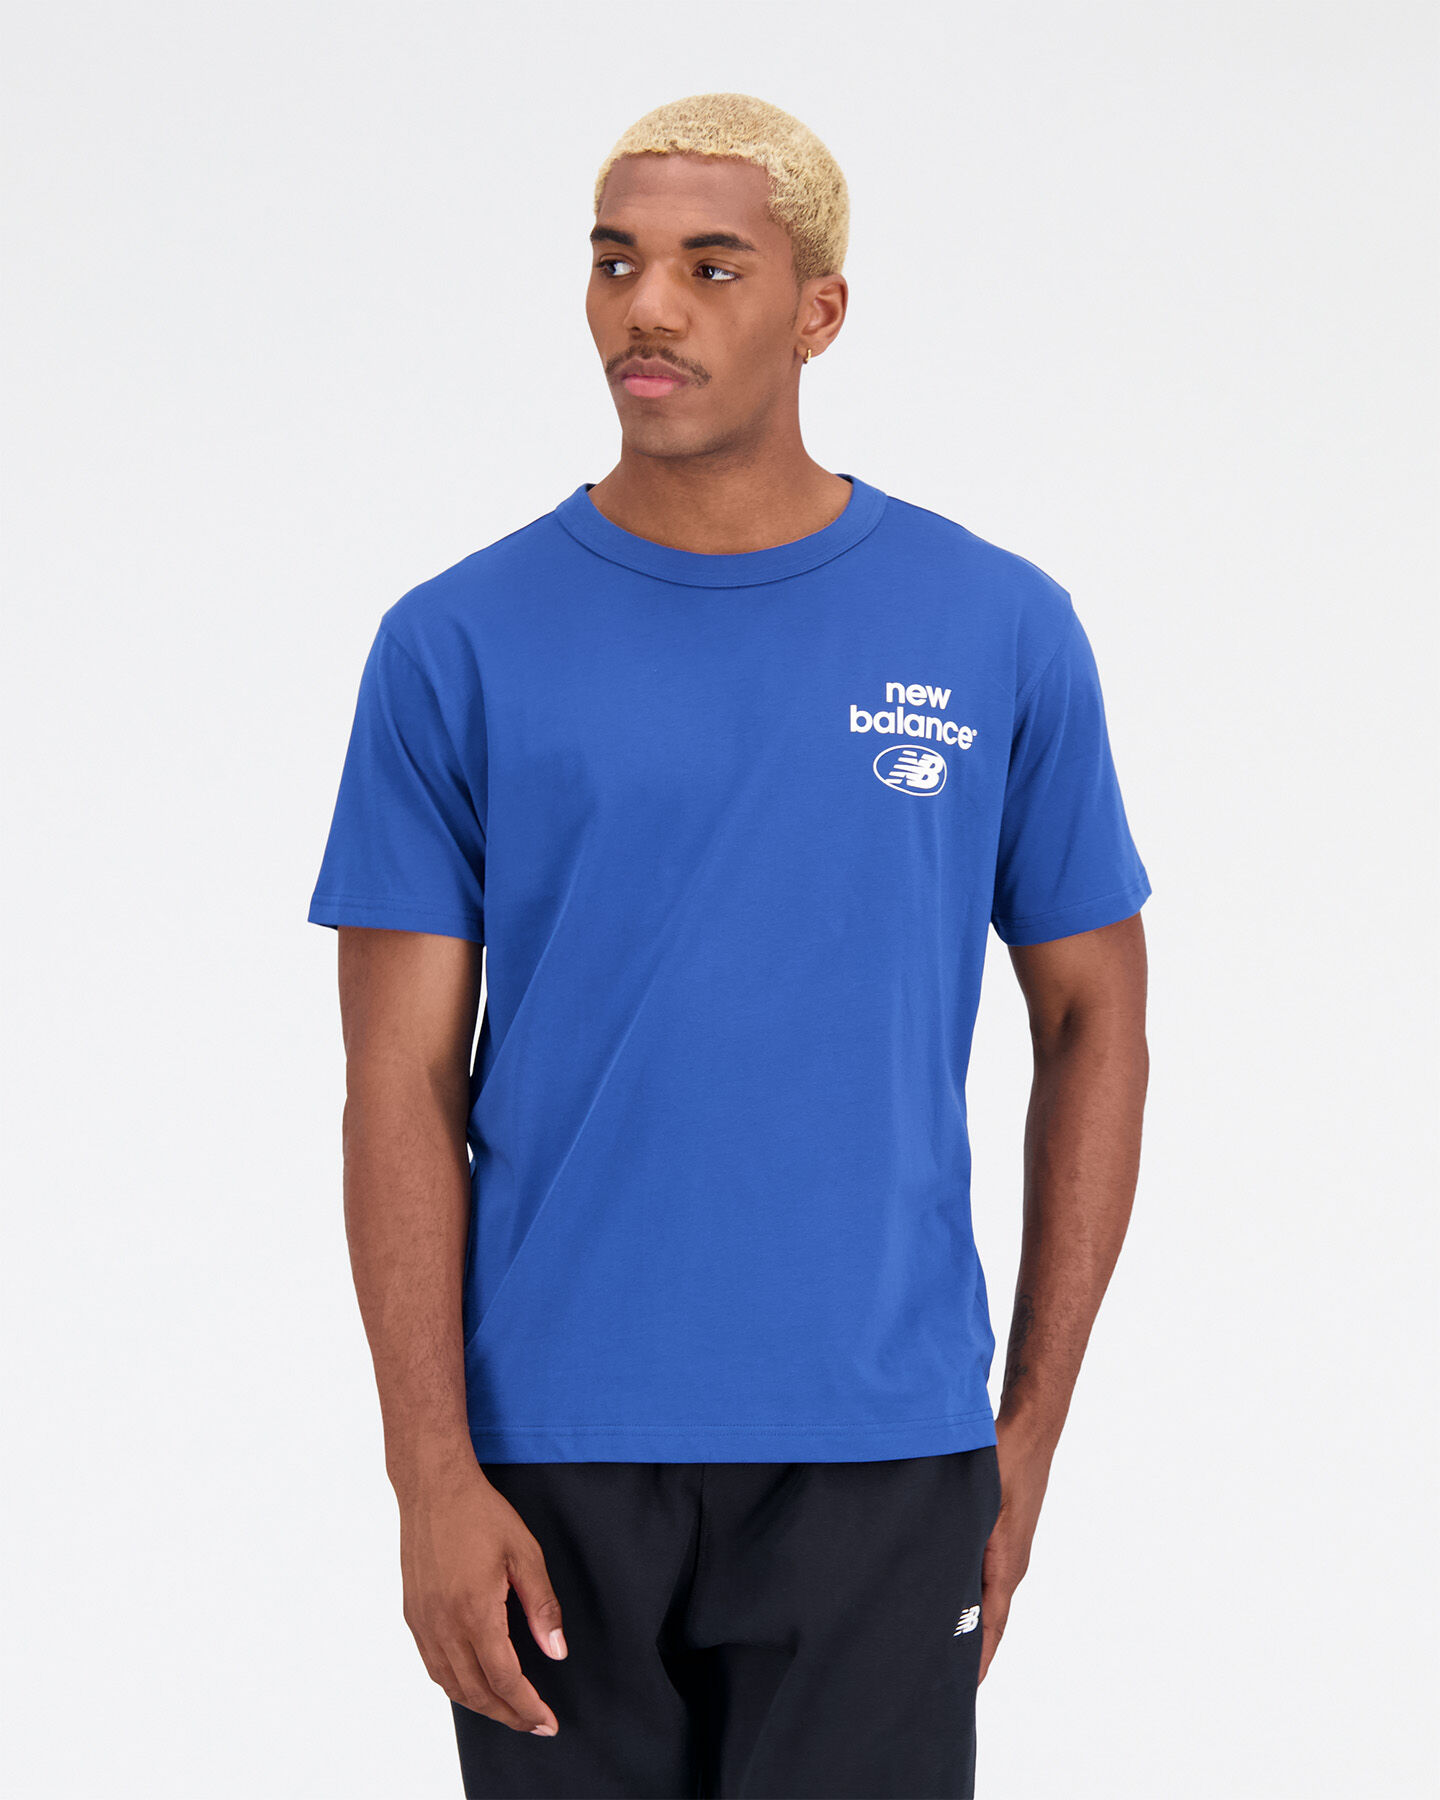  T-Shirt NEW BALANCE ESSENTIAL REIMAGINED M S5533705|-|S* scatto 0